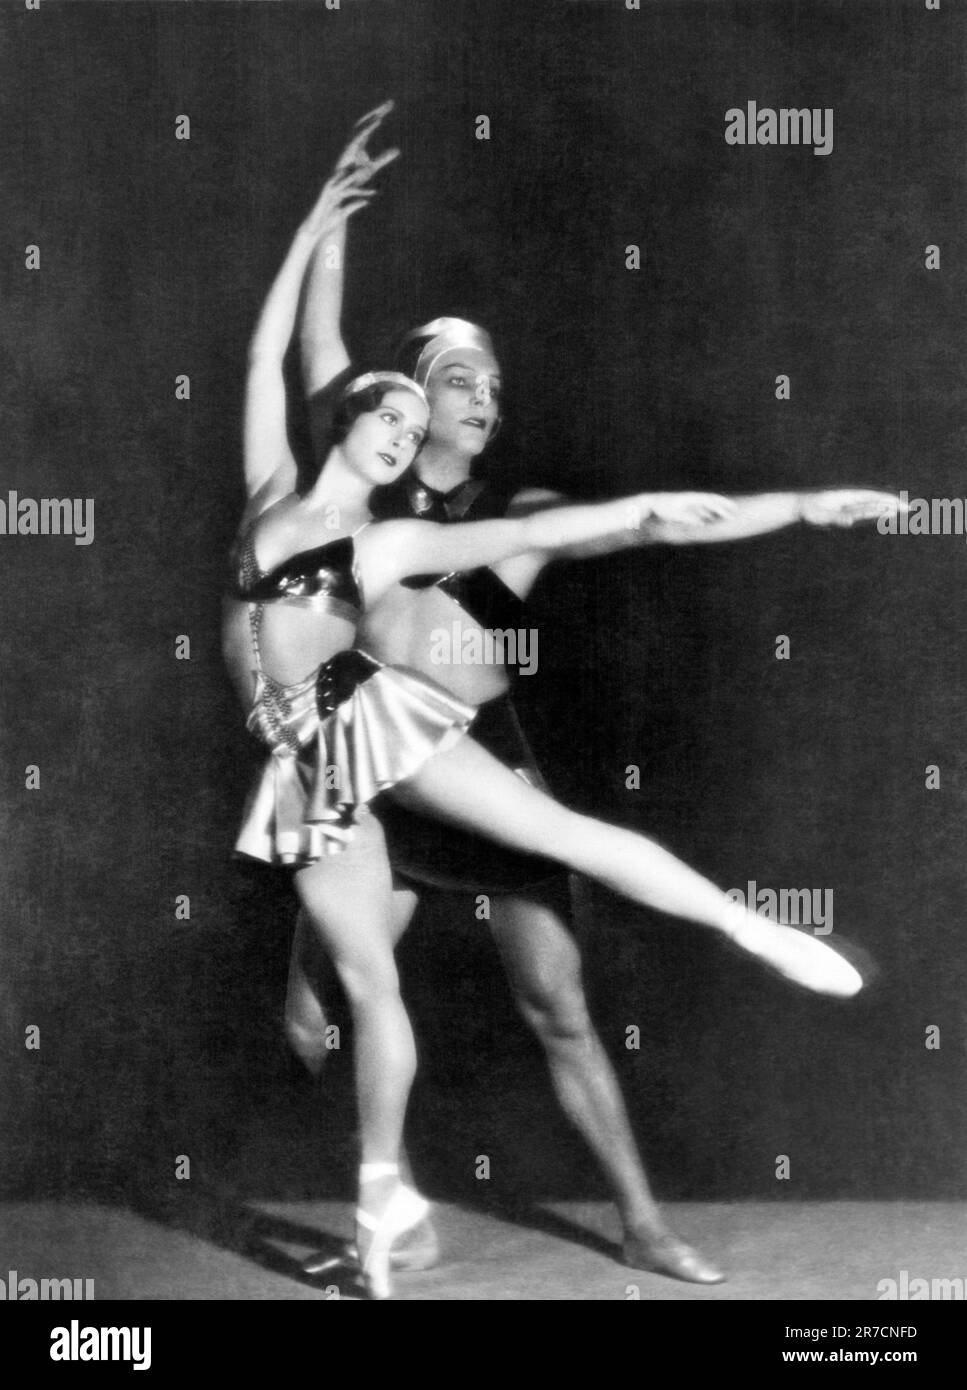 Italy:  September 1, 1935 Two members of the Richter Ballet Company performing a pas de deux on stage. Stock Photo